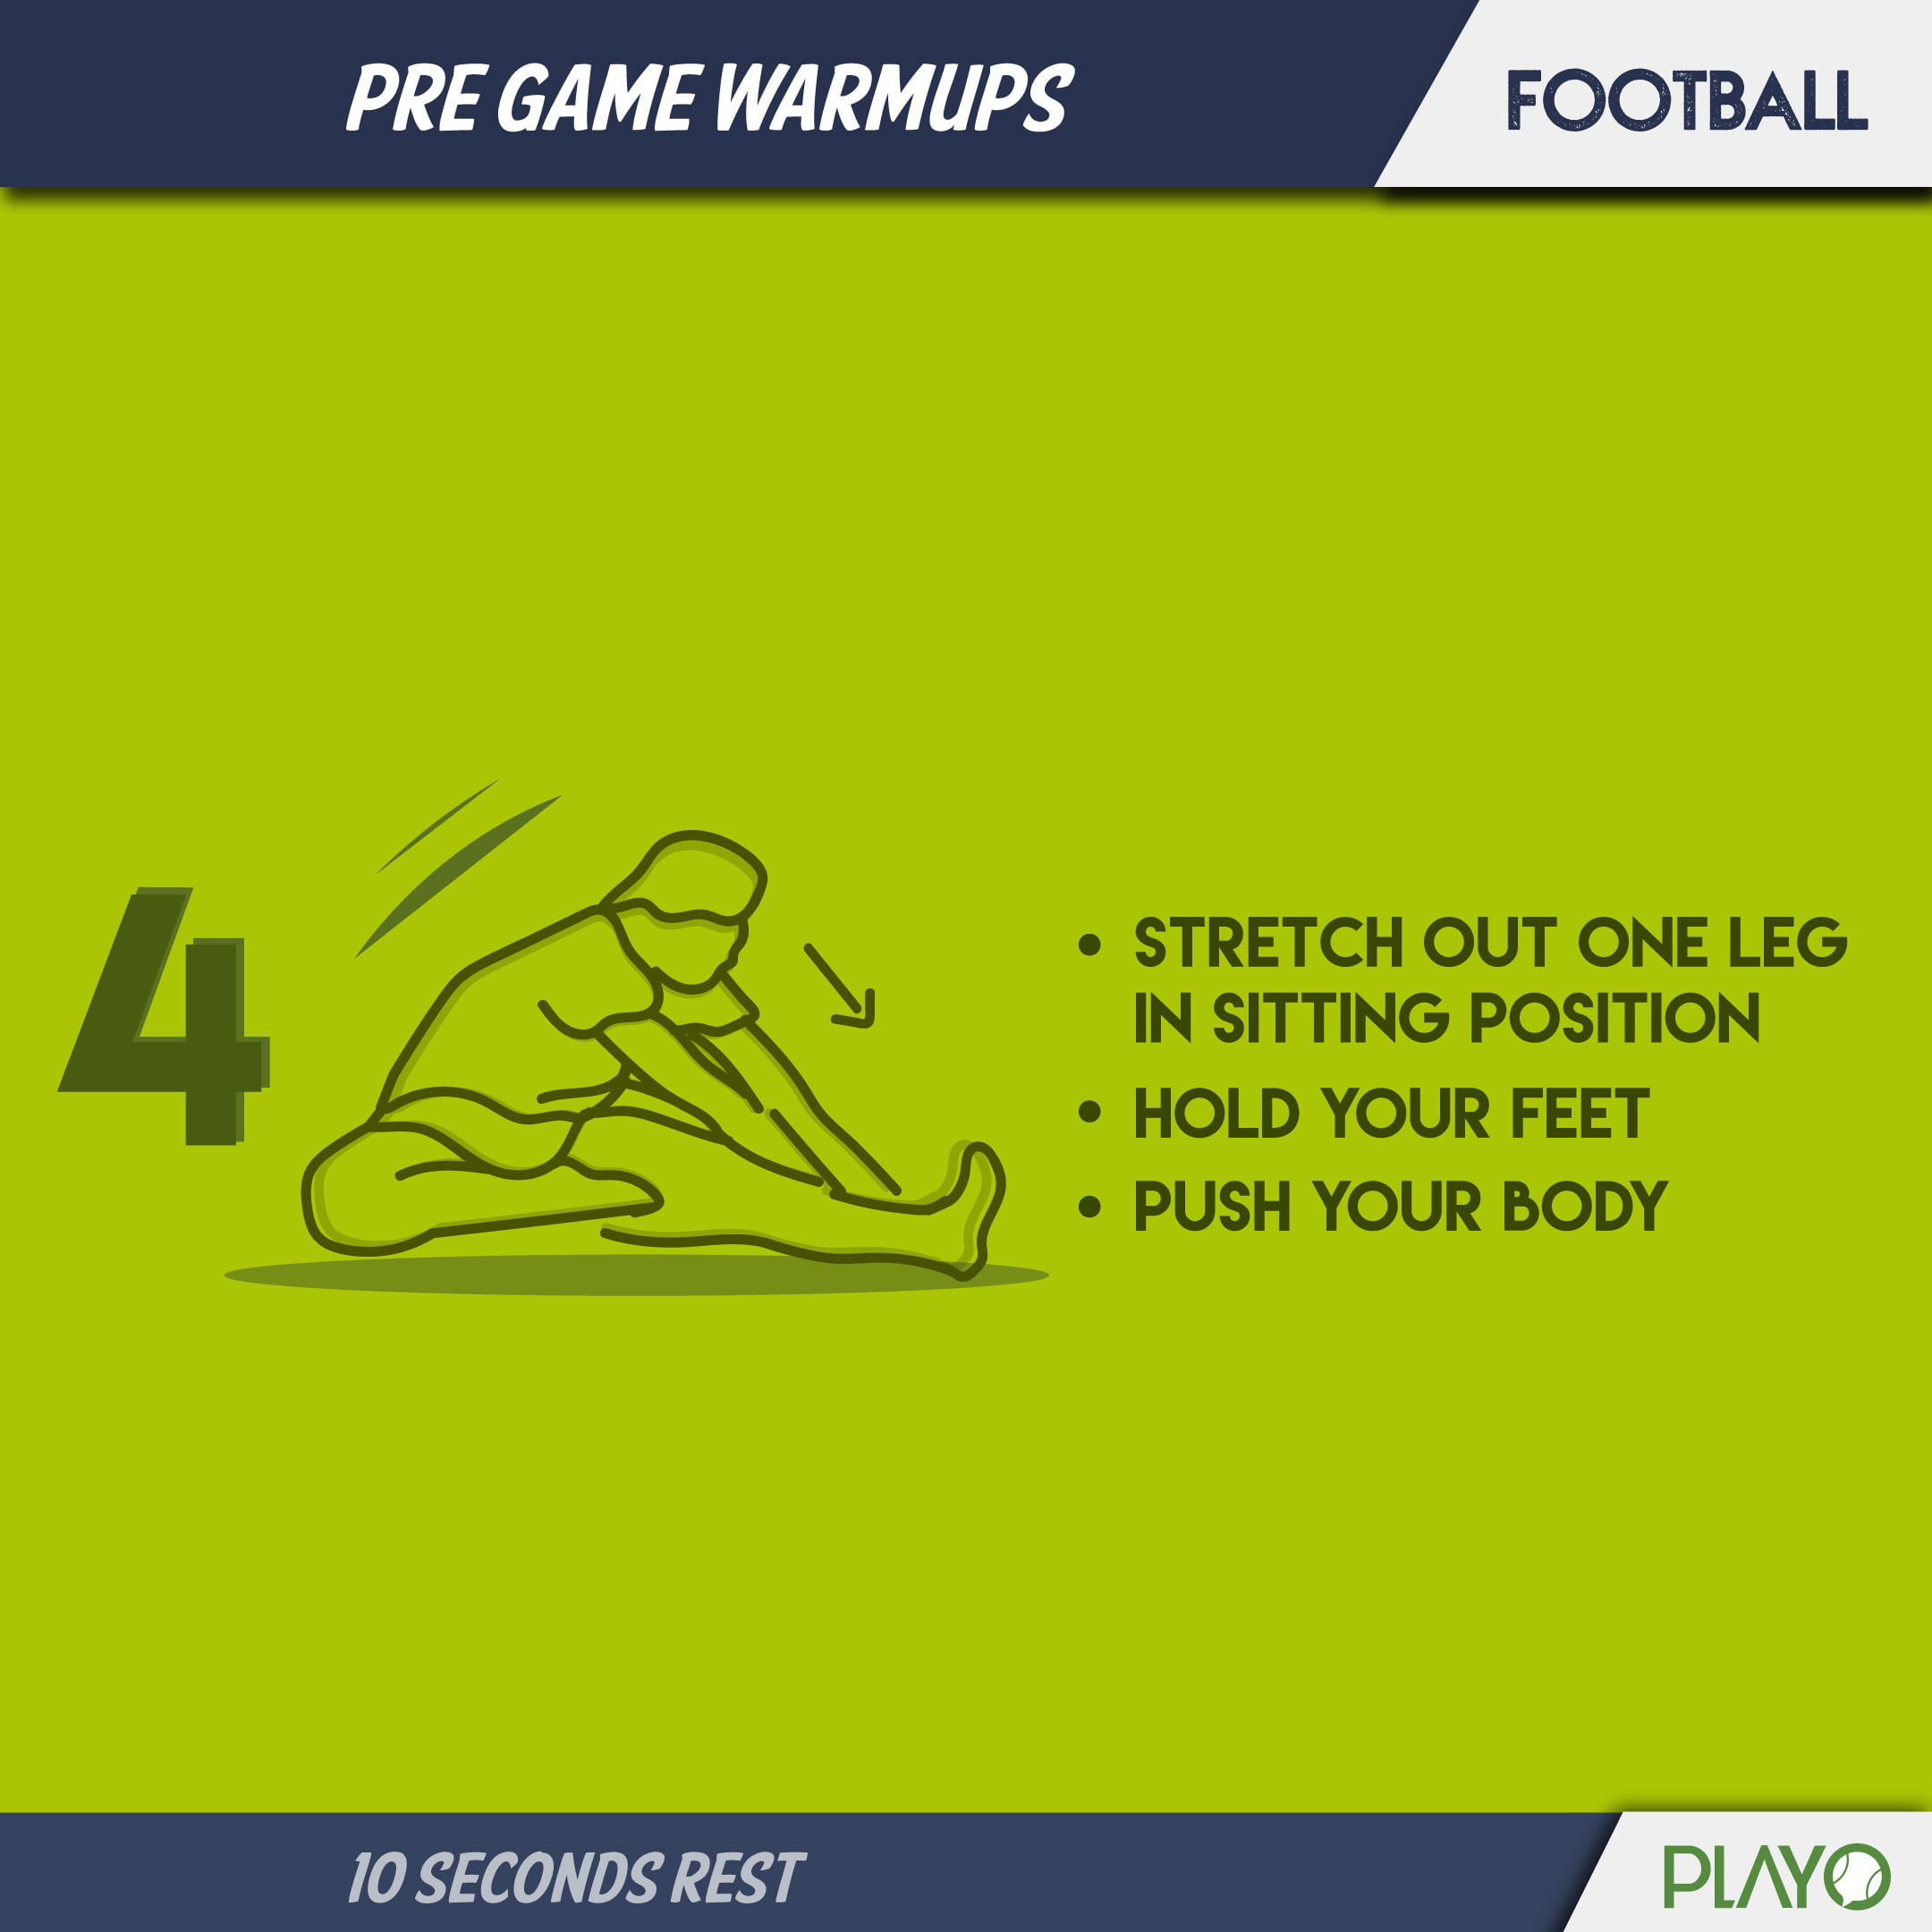 Hamstring stretch for warm-up before football